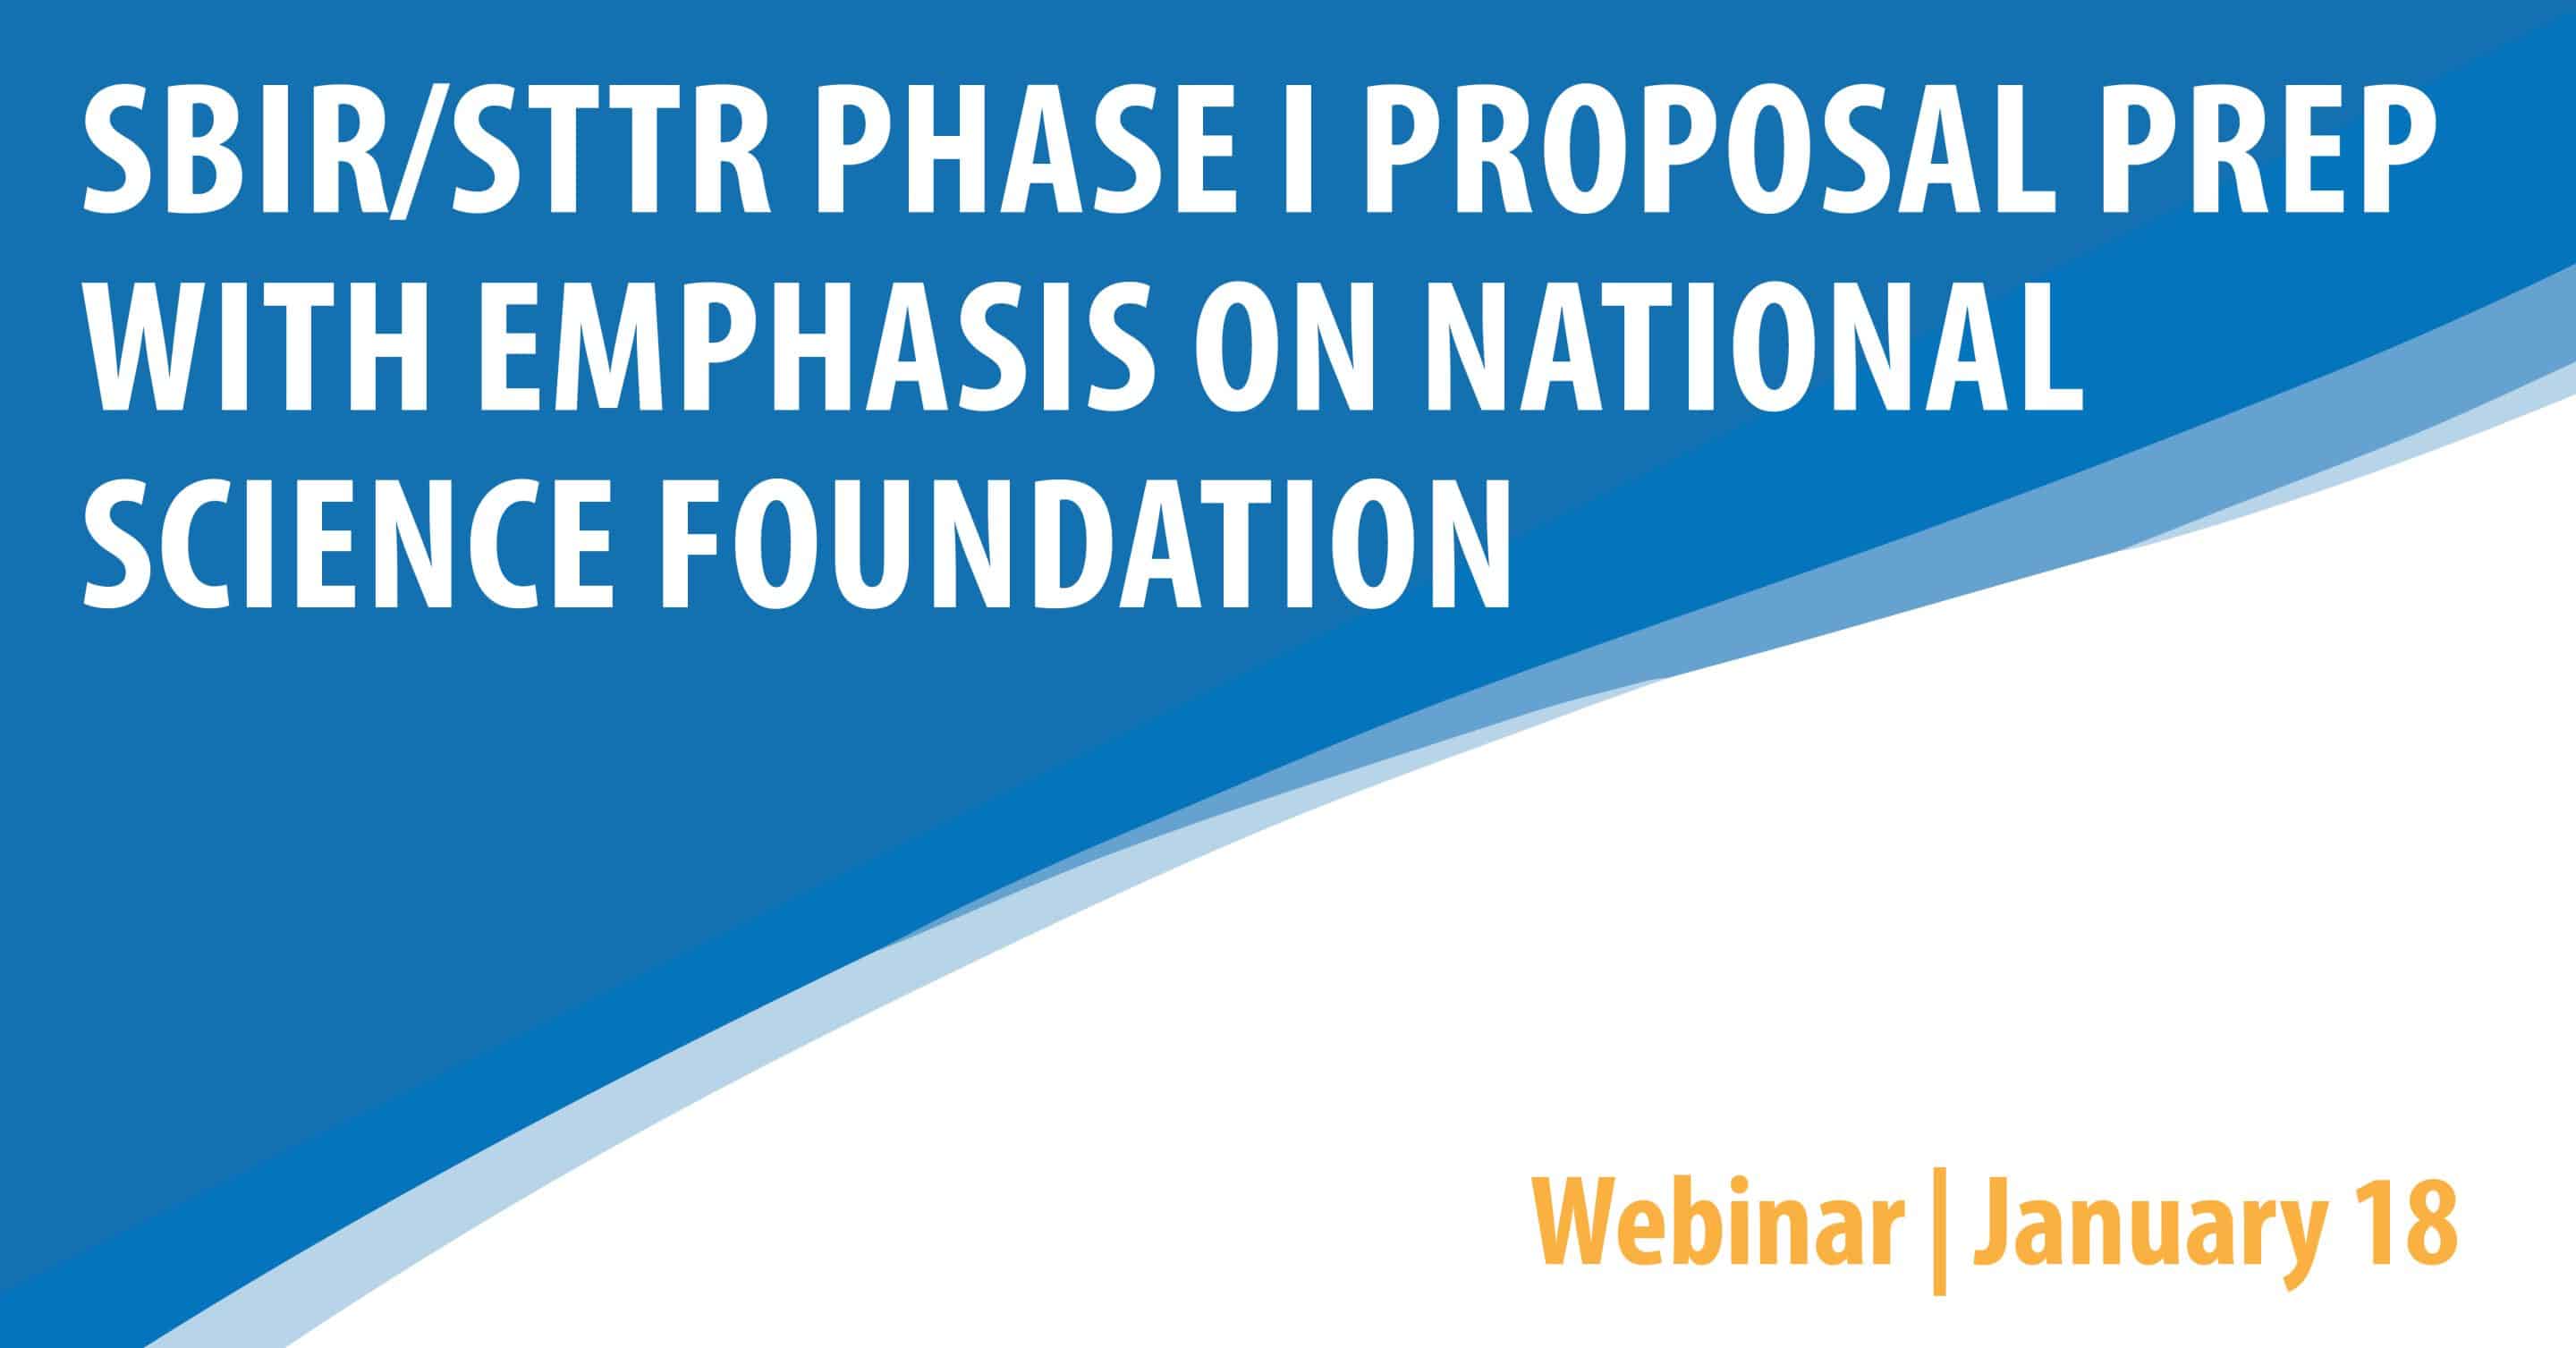 SBIR/STTR Phase I Proposal Prep with emphasis on National Science Foundation